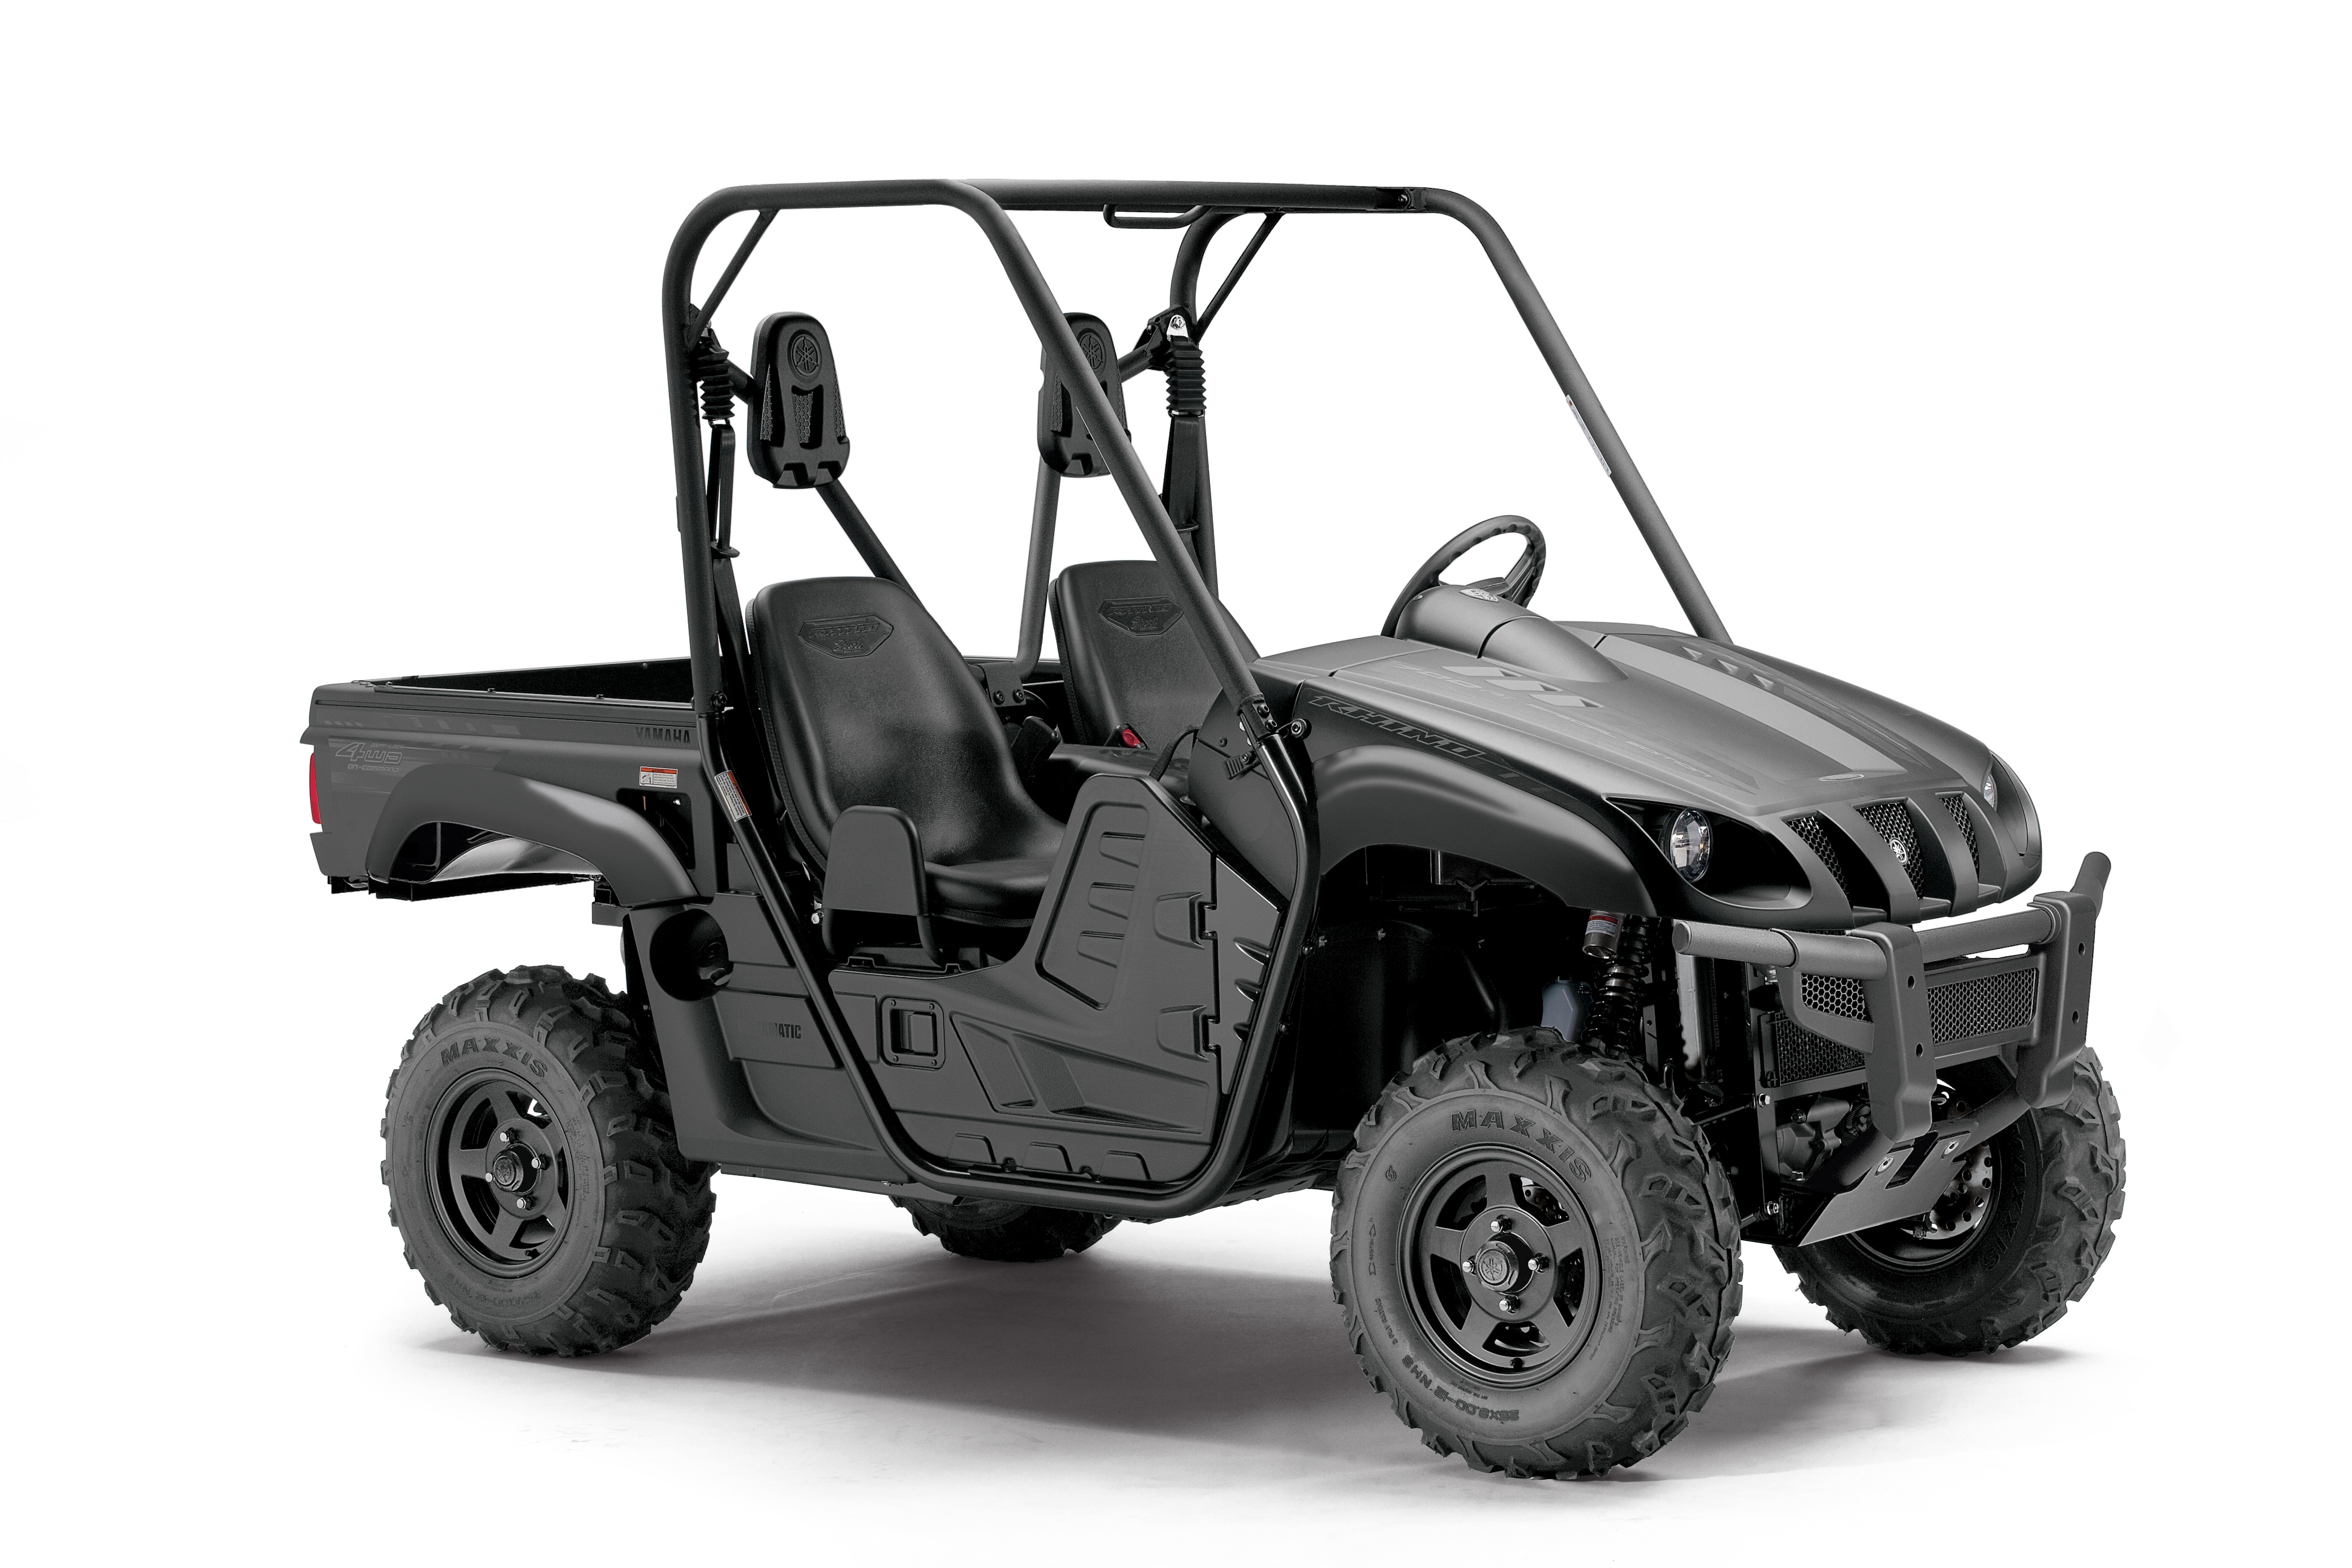 Yamaha Introduces New Tactical Black Special Edition Grizzly 700 And Rhino 700 Vehicles – Assembled In The USA